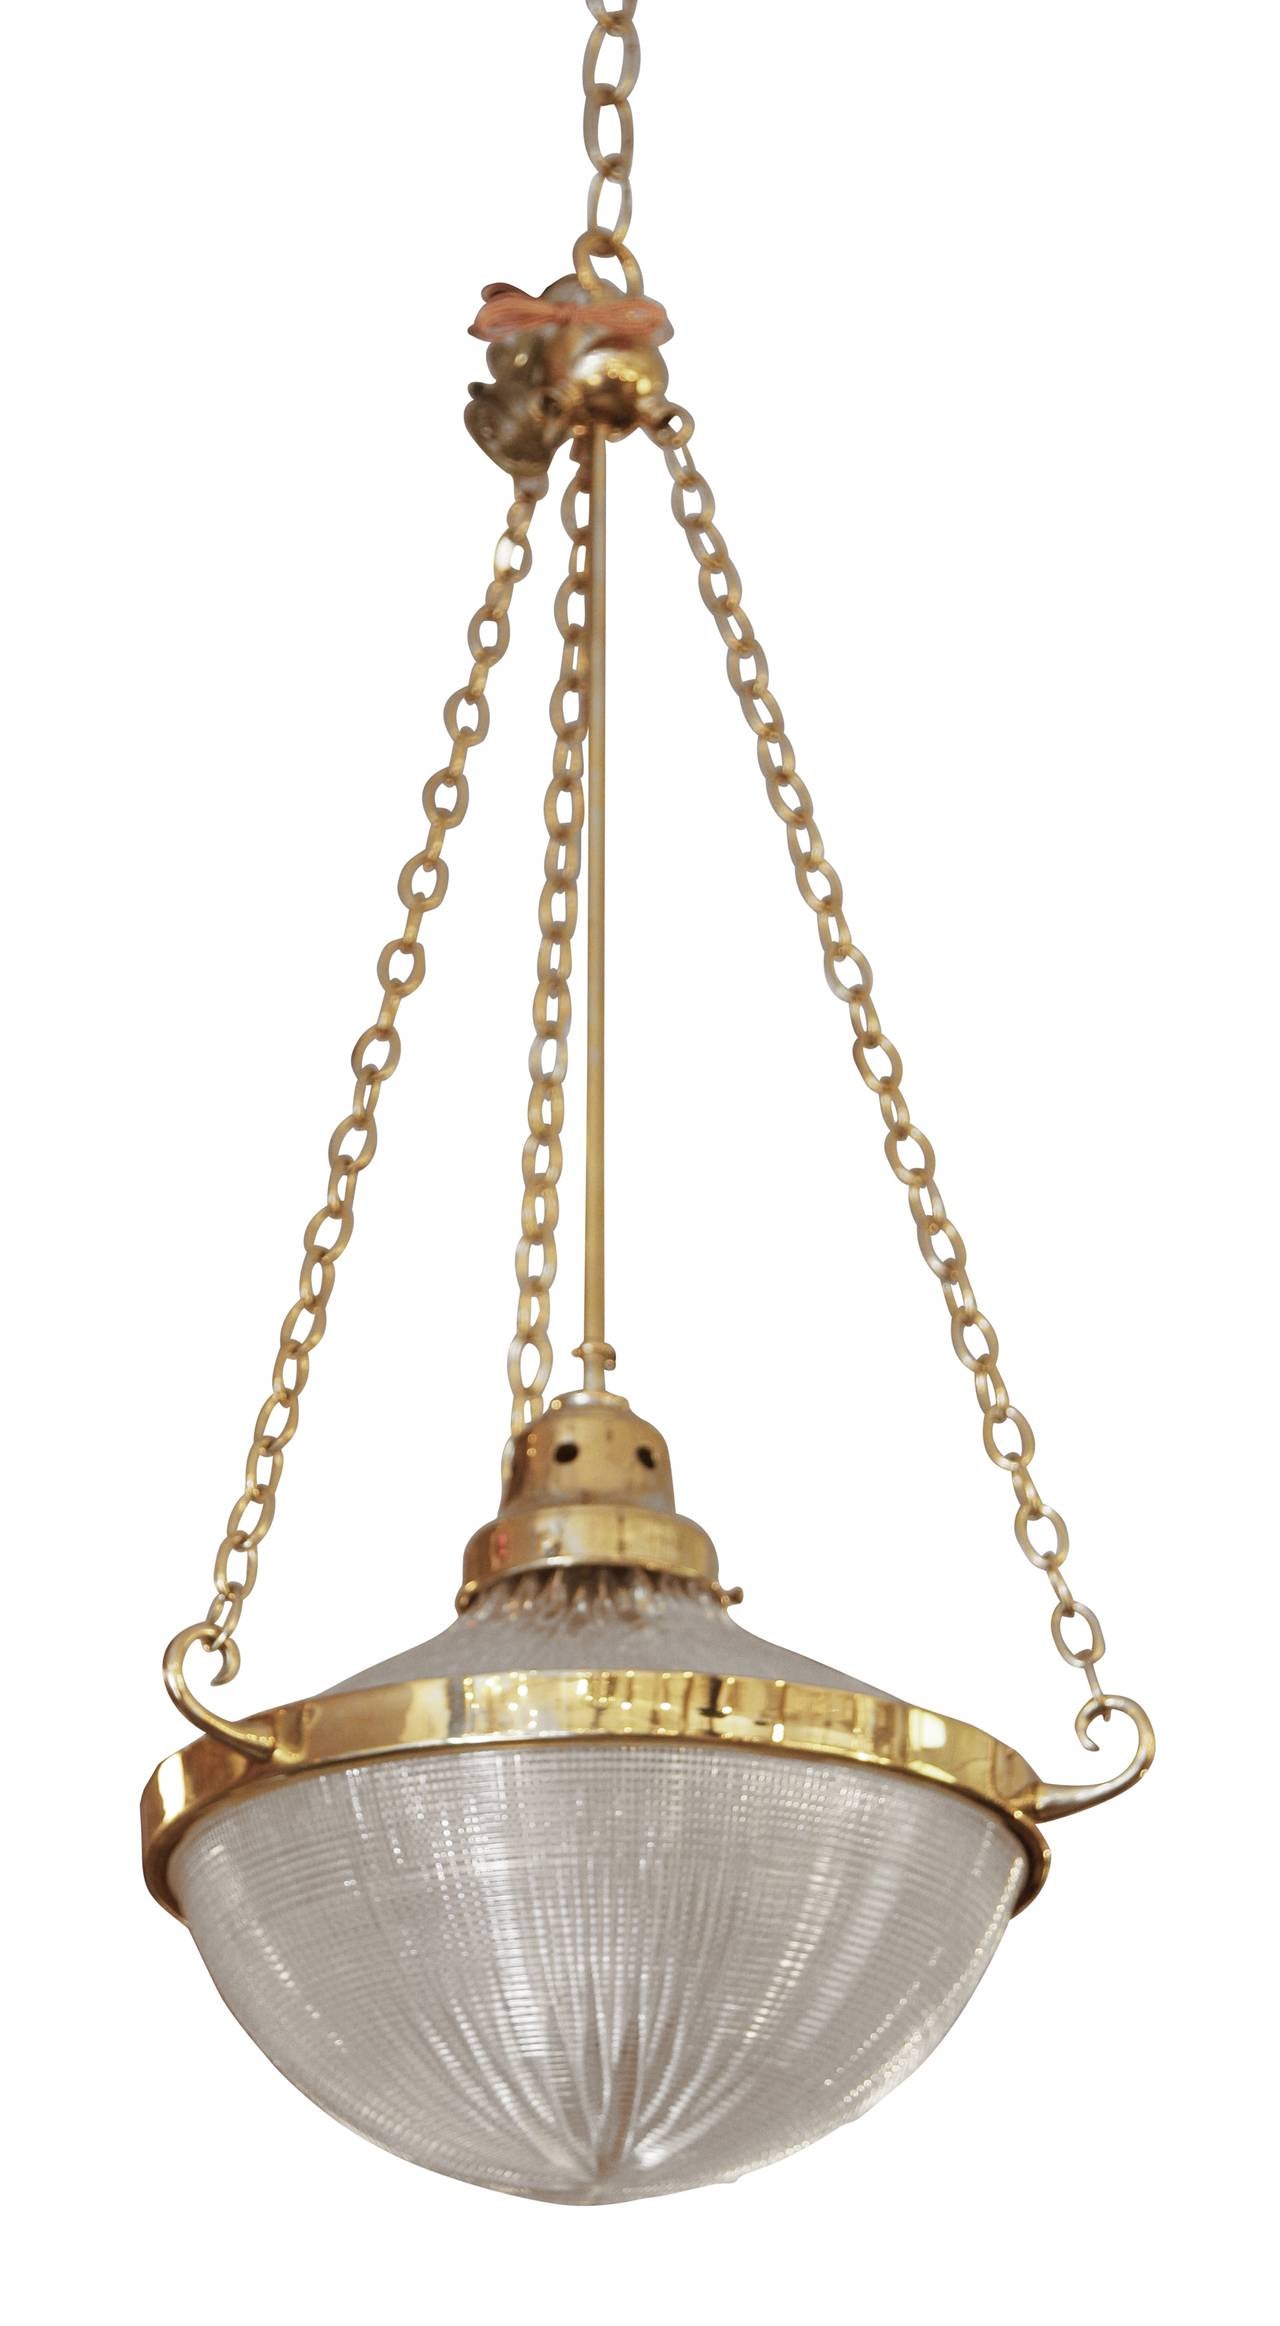 English Holophane pendant light fixture with center bowl attached by center ring and hung with a three chain support. This item can be viewed at our 302 Bowery location in Manhattan.